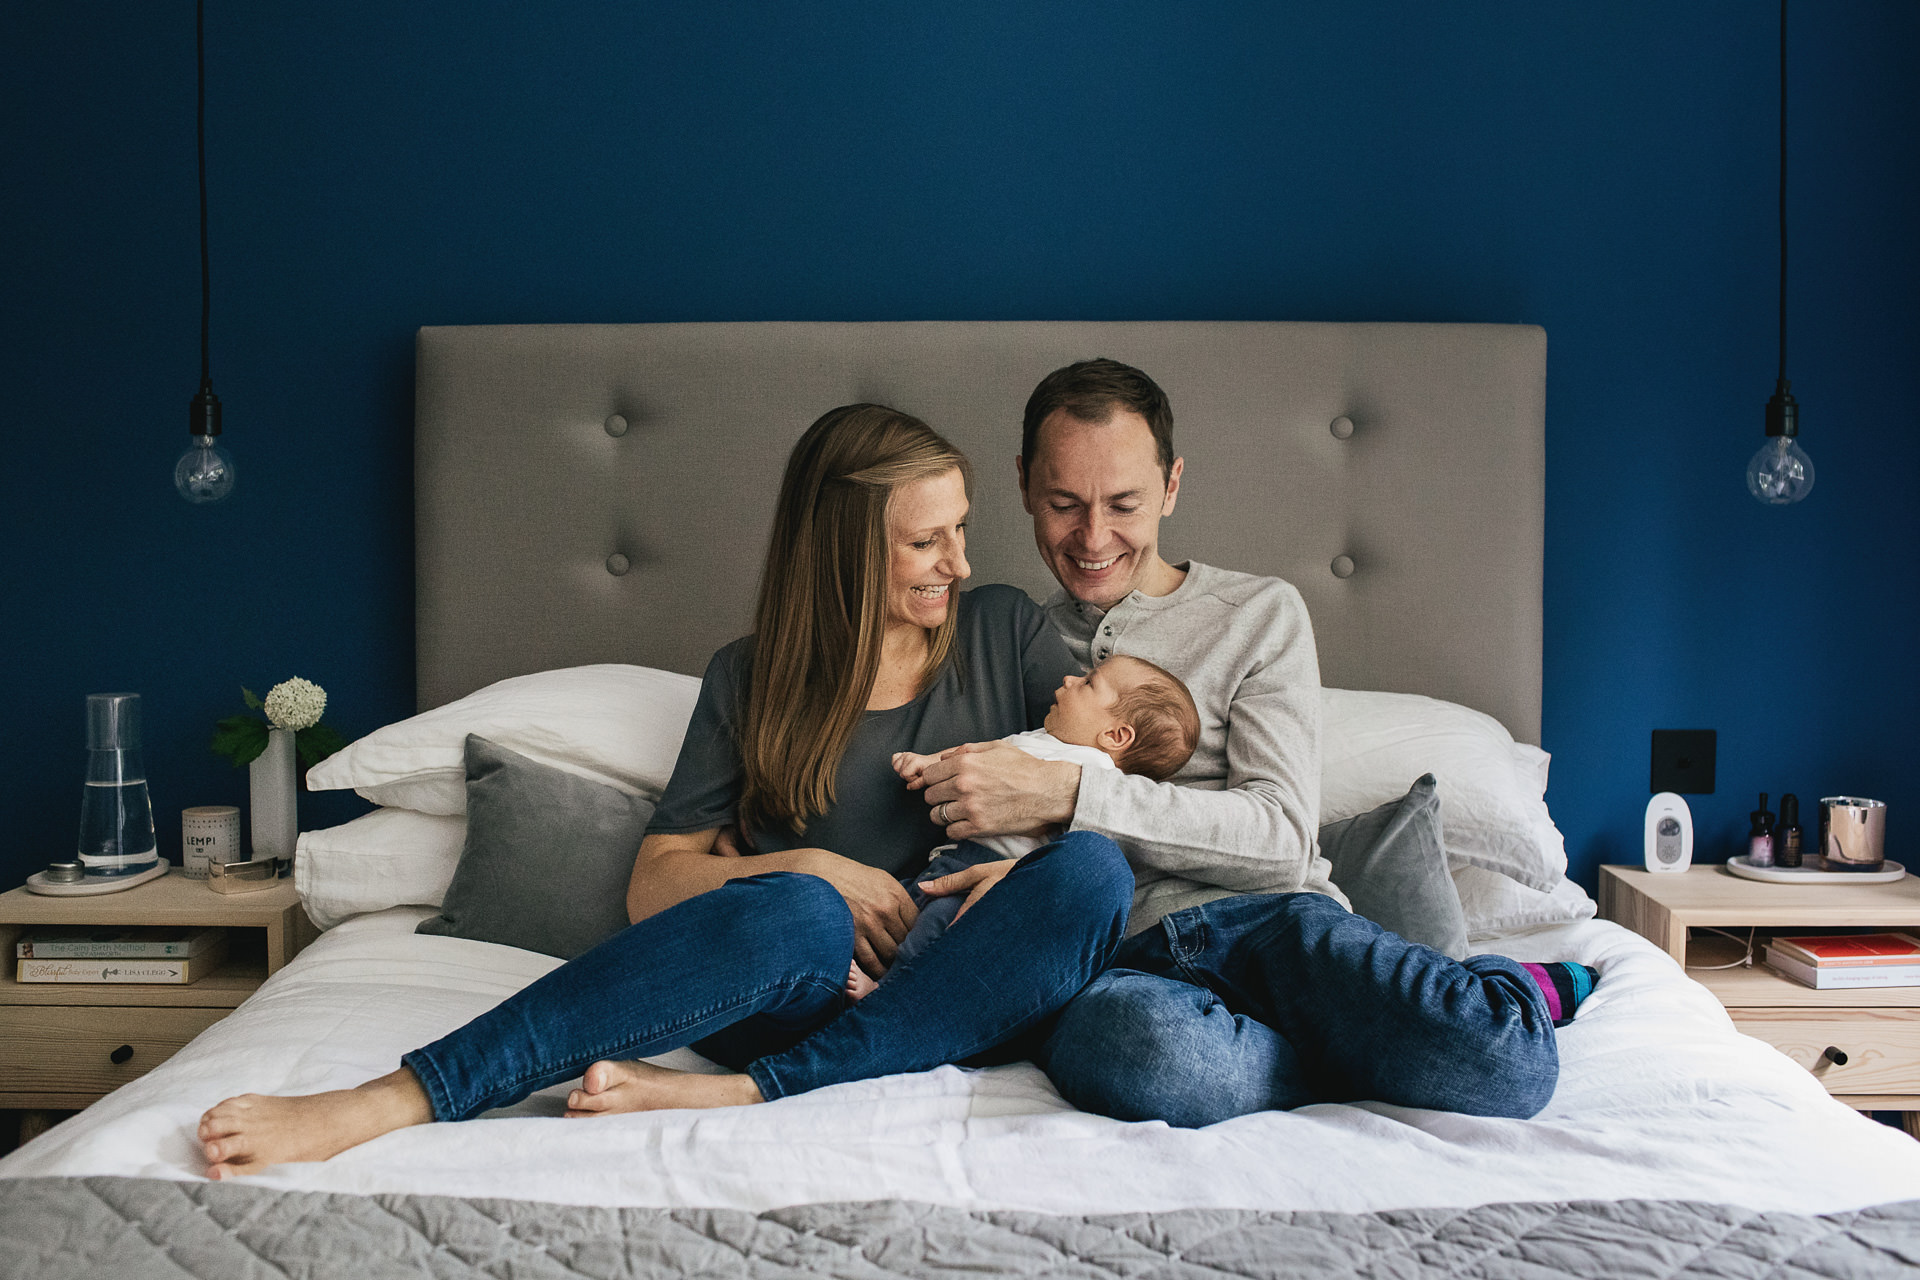 Portrait of a family with a newborn baby at home in their bedroom, smiling at each other on a bed